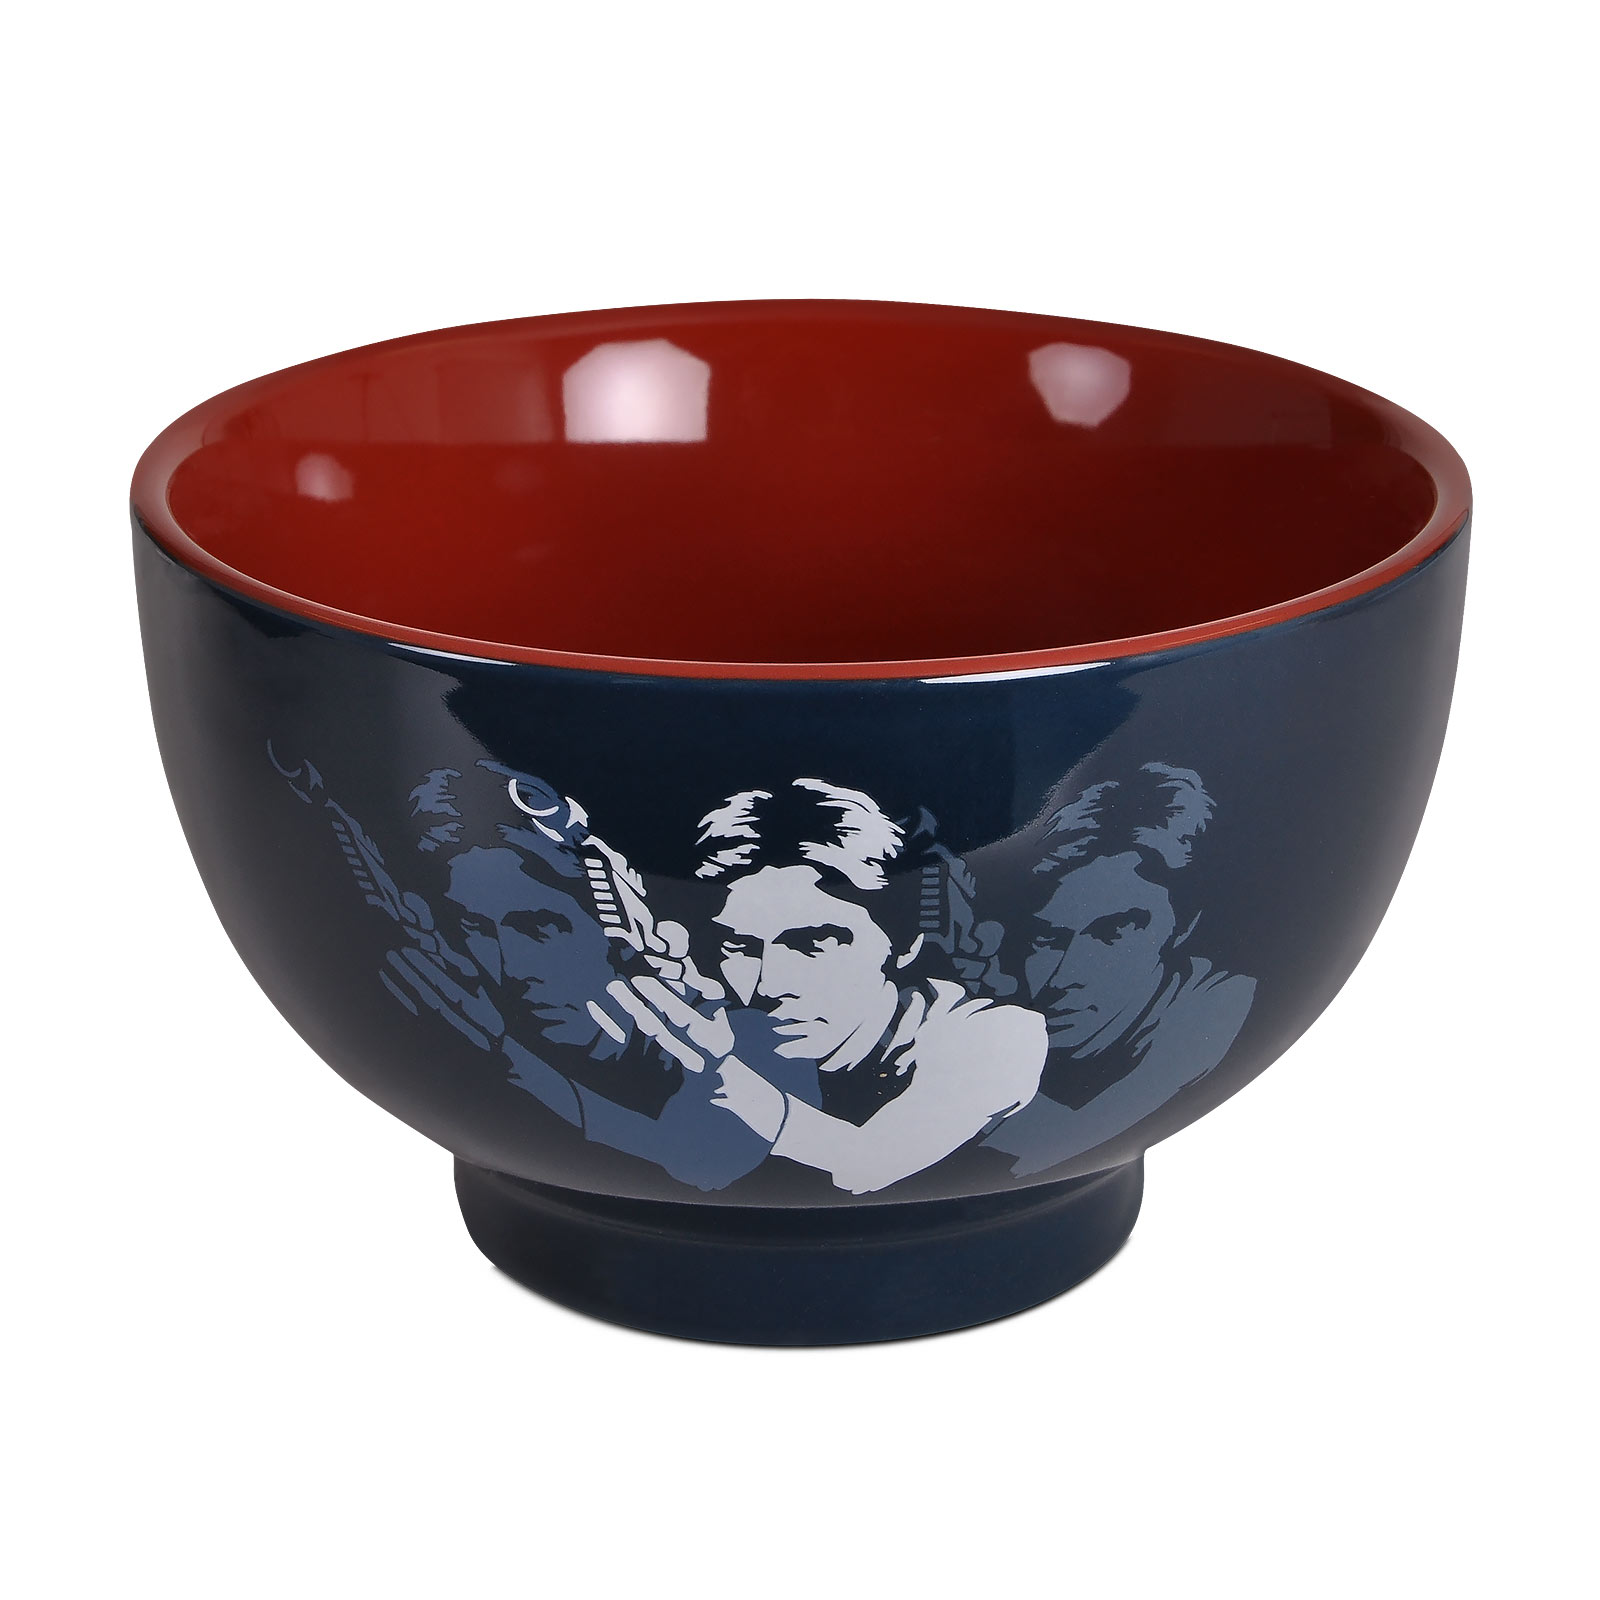 Star Wars - Han Solo Cereal Bowl